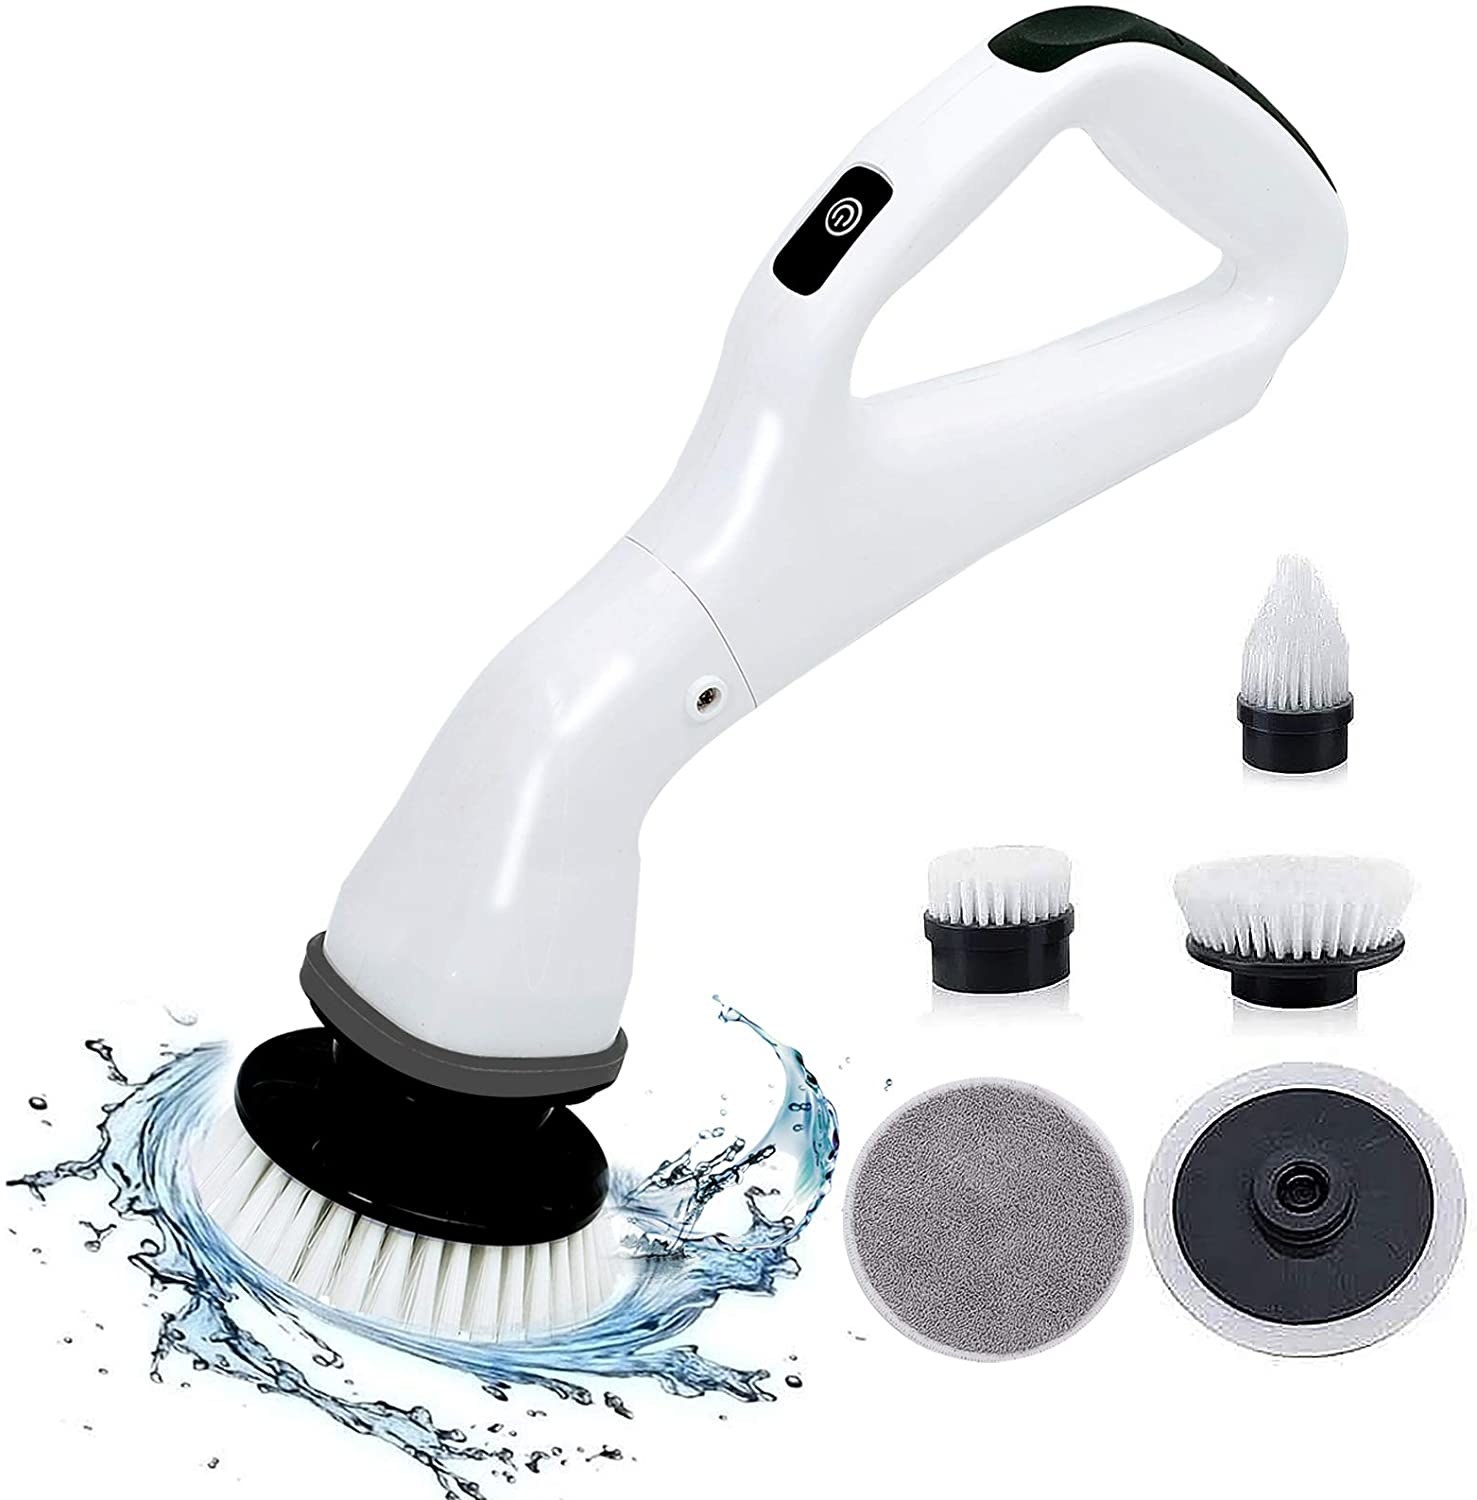 the white spinning brush with its included attachments